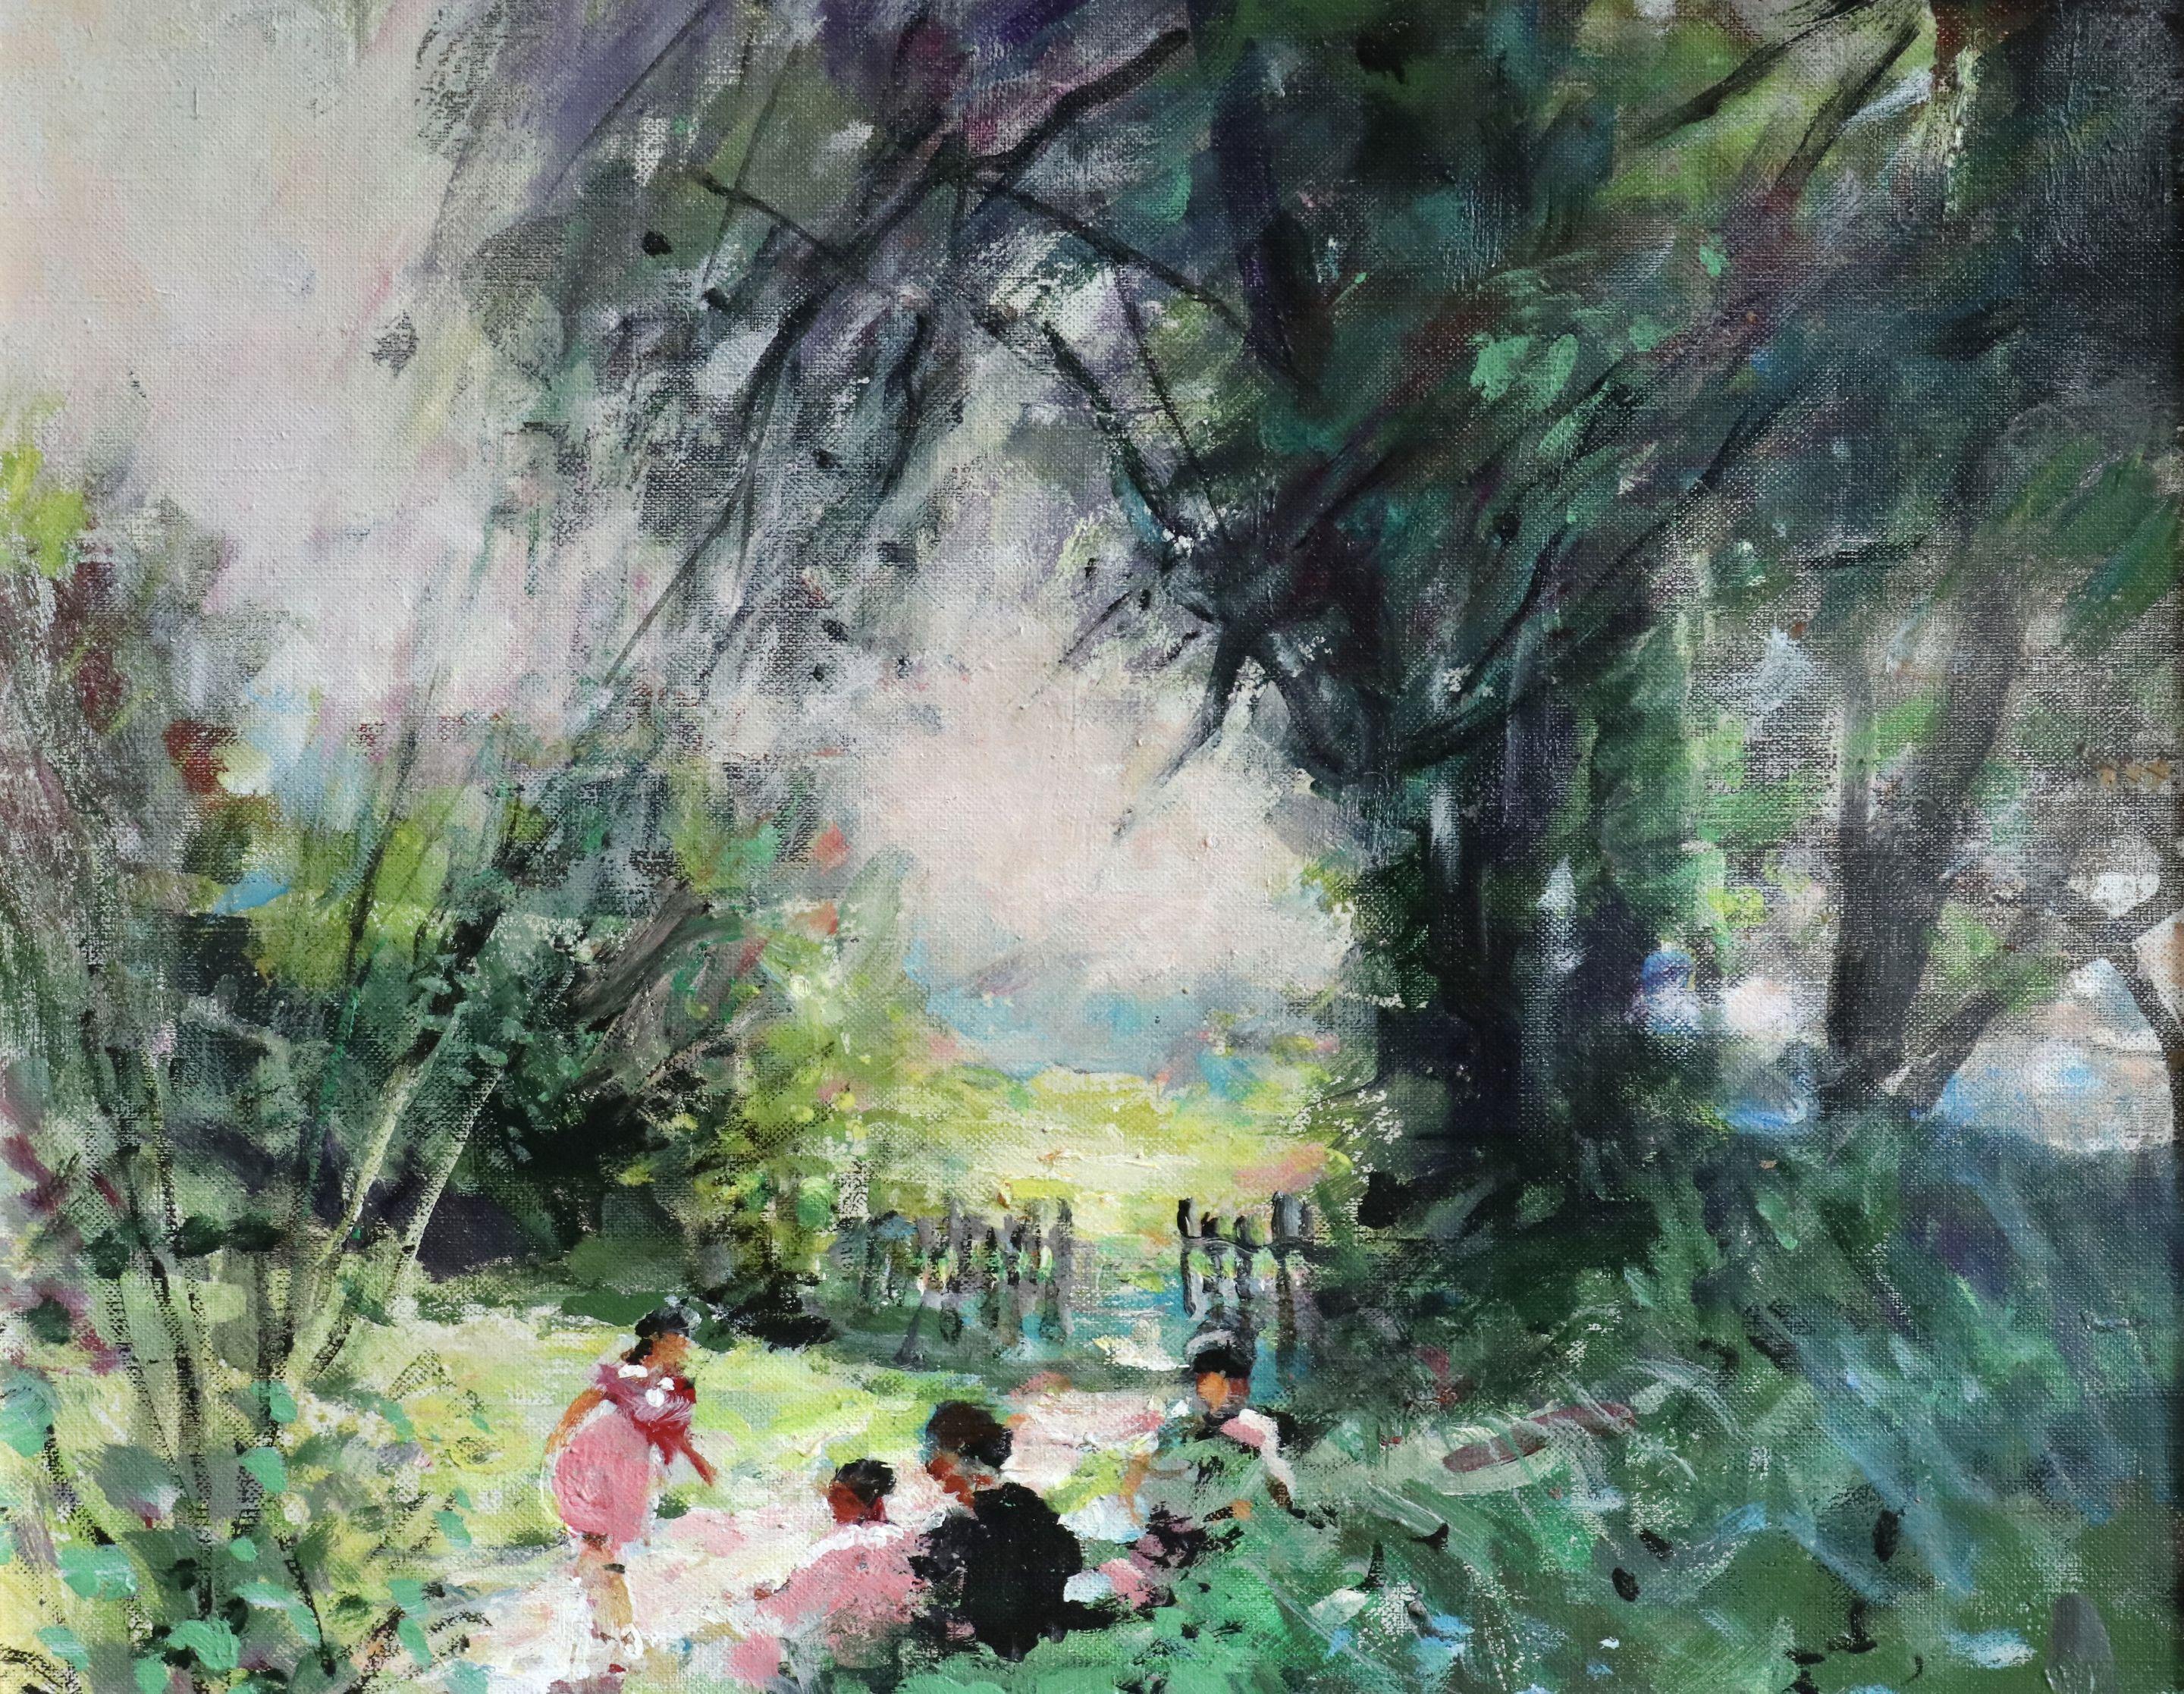 Children Playing - 20th Century Oil, Figures in Landscape by Jules Rene Herve - Impressionist Painting by Jules René Hervé